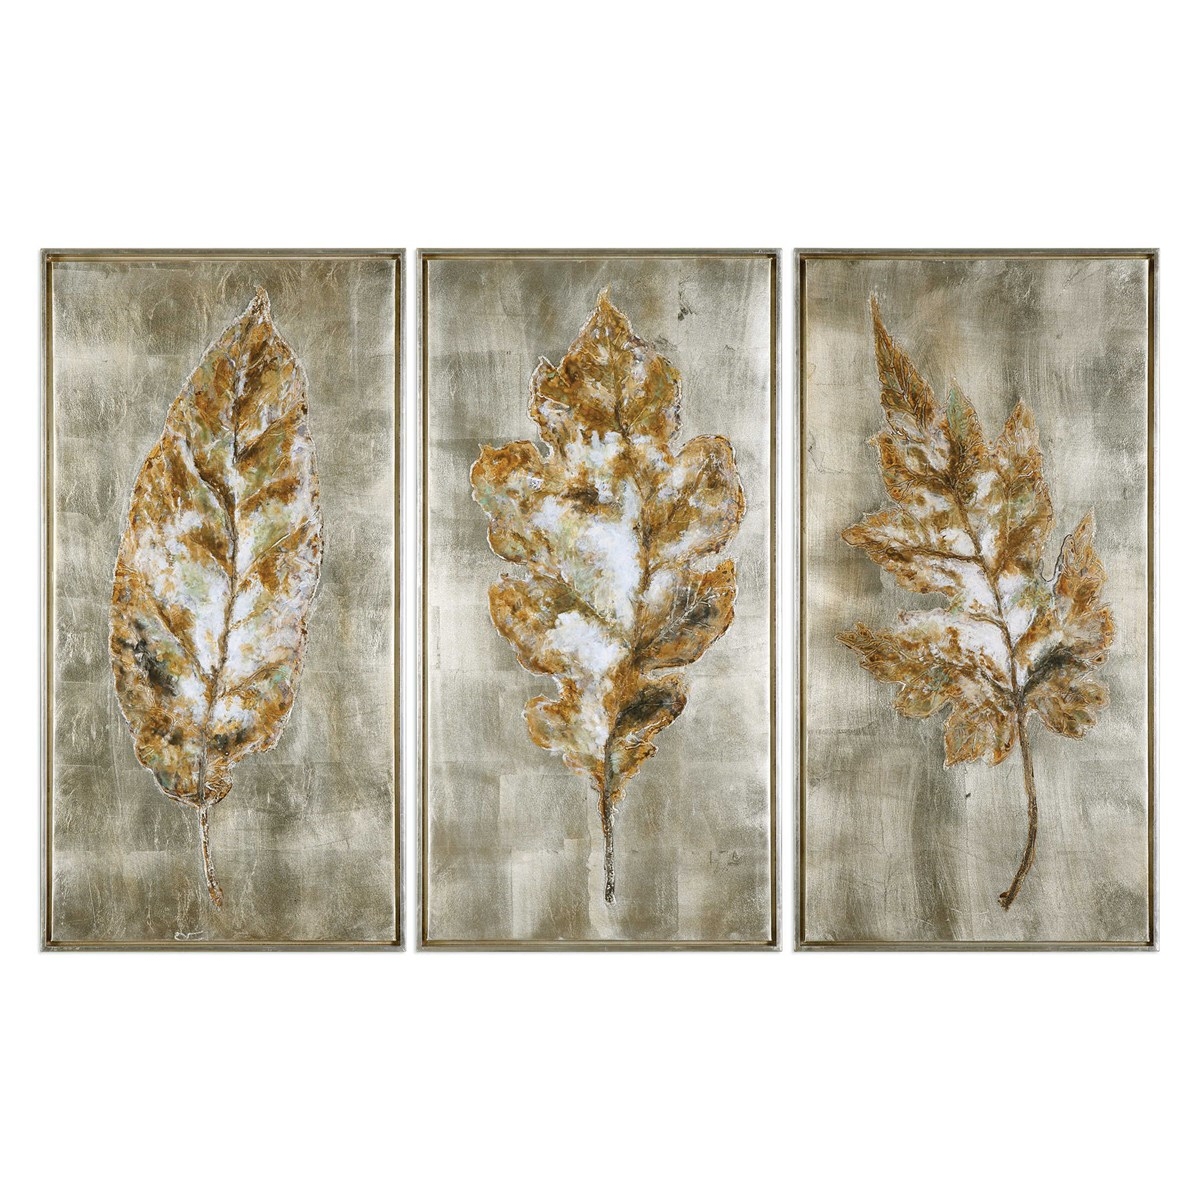 CHAMPAGNE LEAVES HAND PAINTED CANVASES, S/3 - Image 0